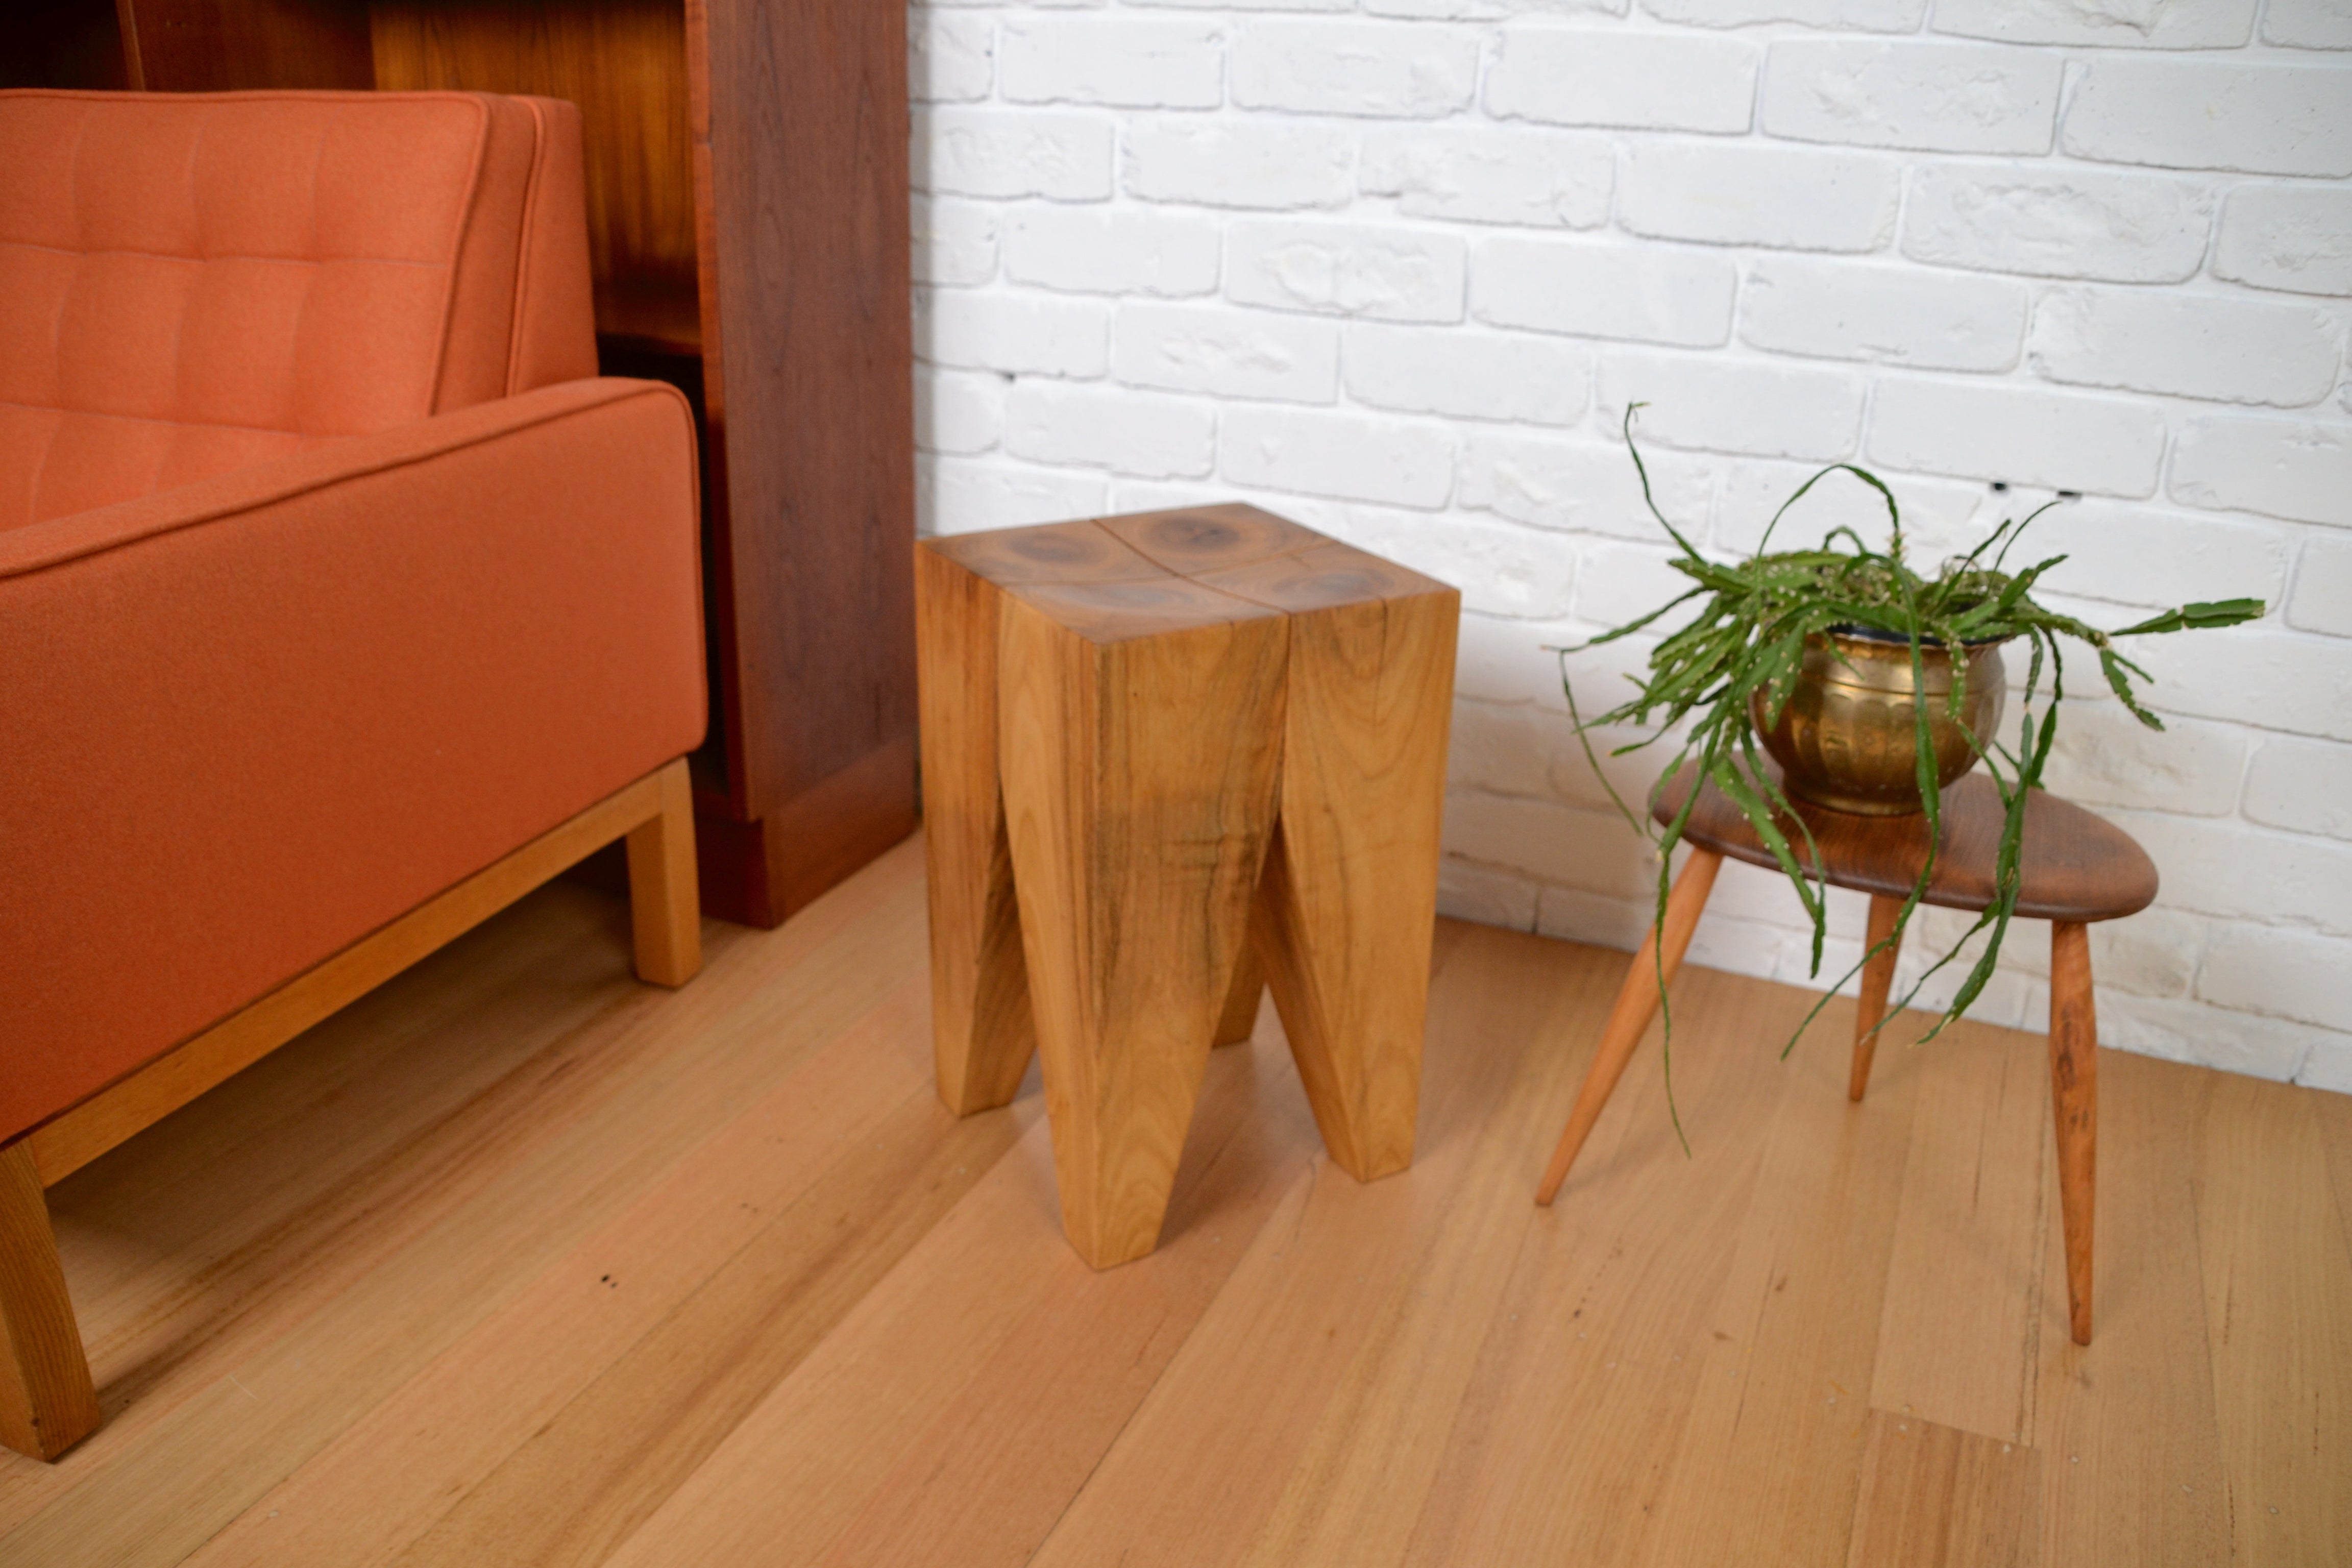 Solid timber tree trunk stool / side table